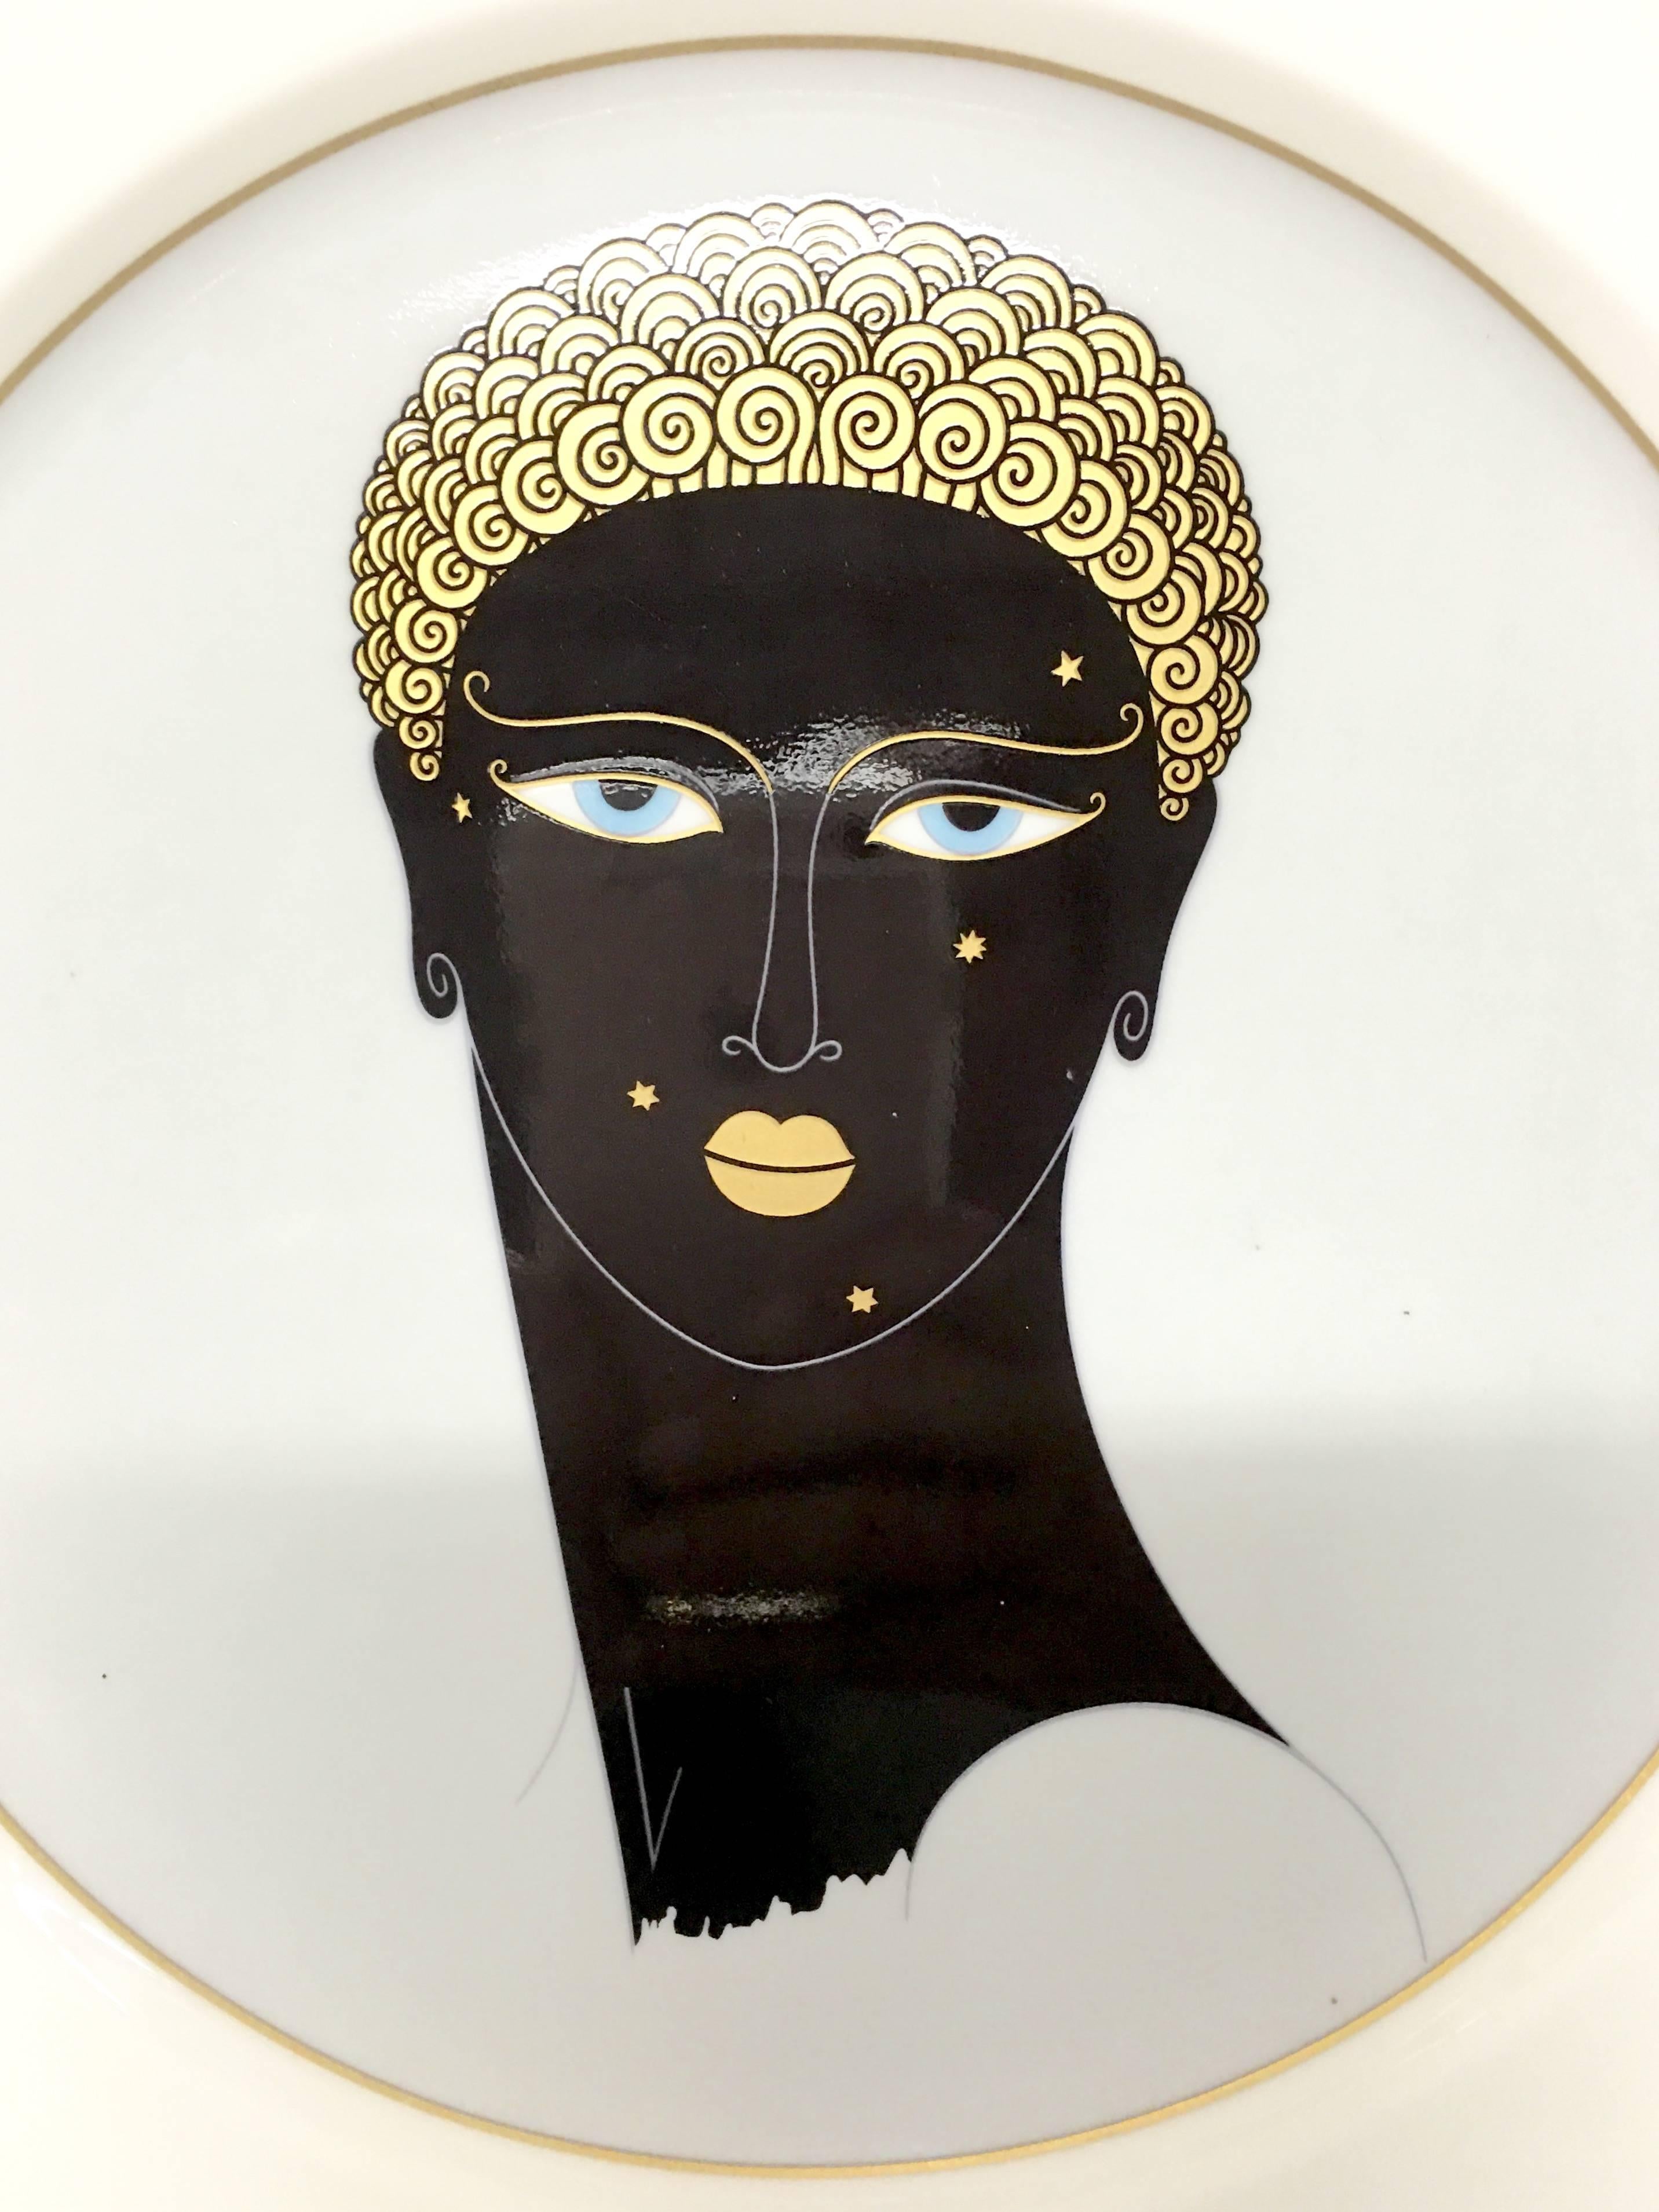 1989 Queen of Sheba collectors plate by. Erte. Signed on the underside, Erte, A-3253/1987 Bone China, Japan.